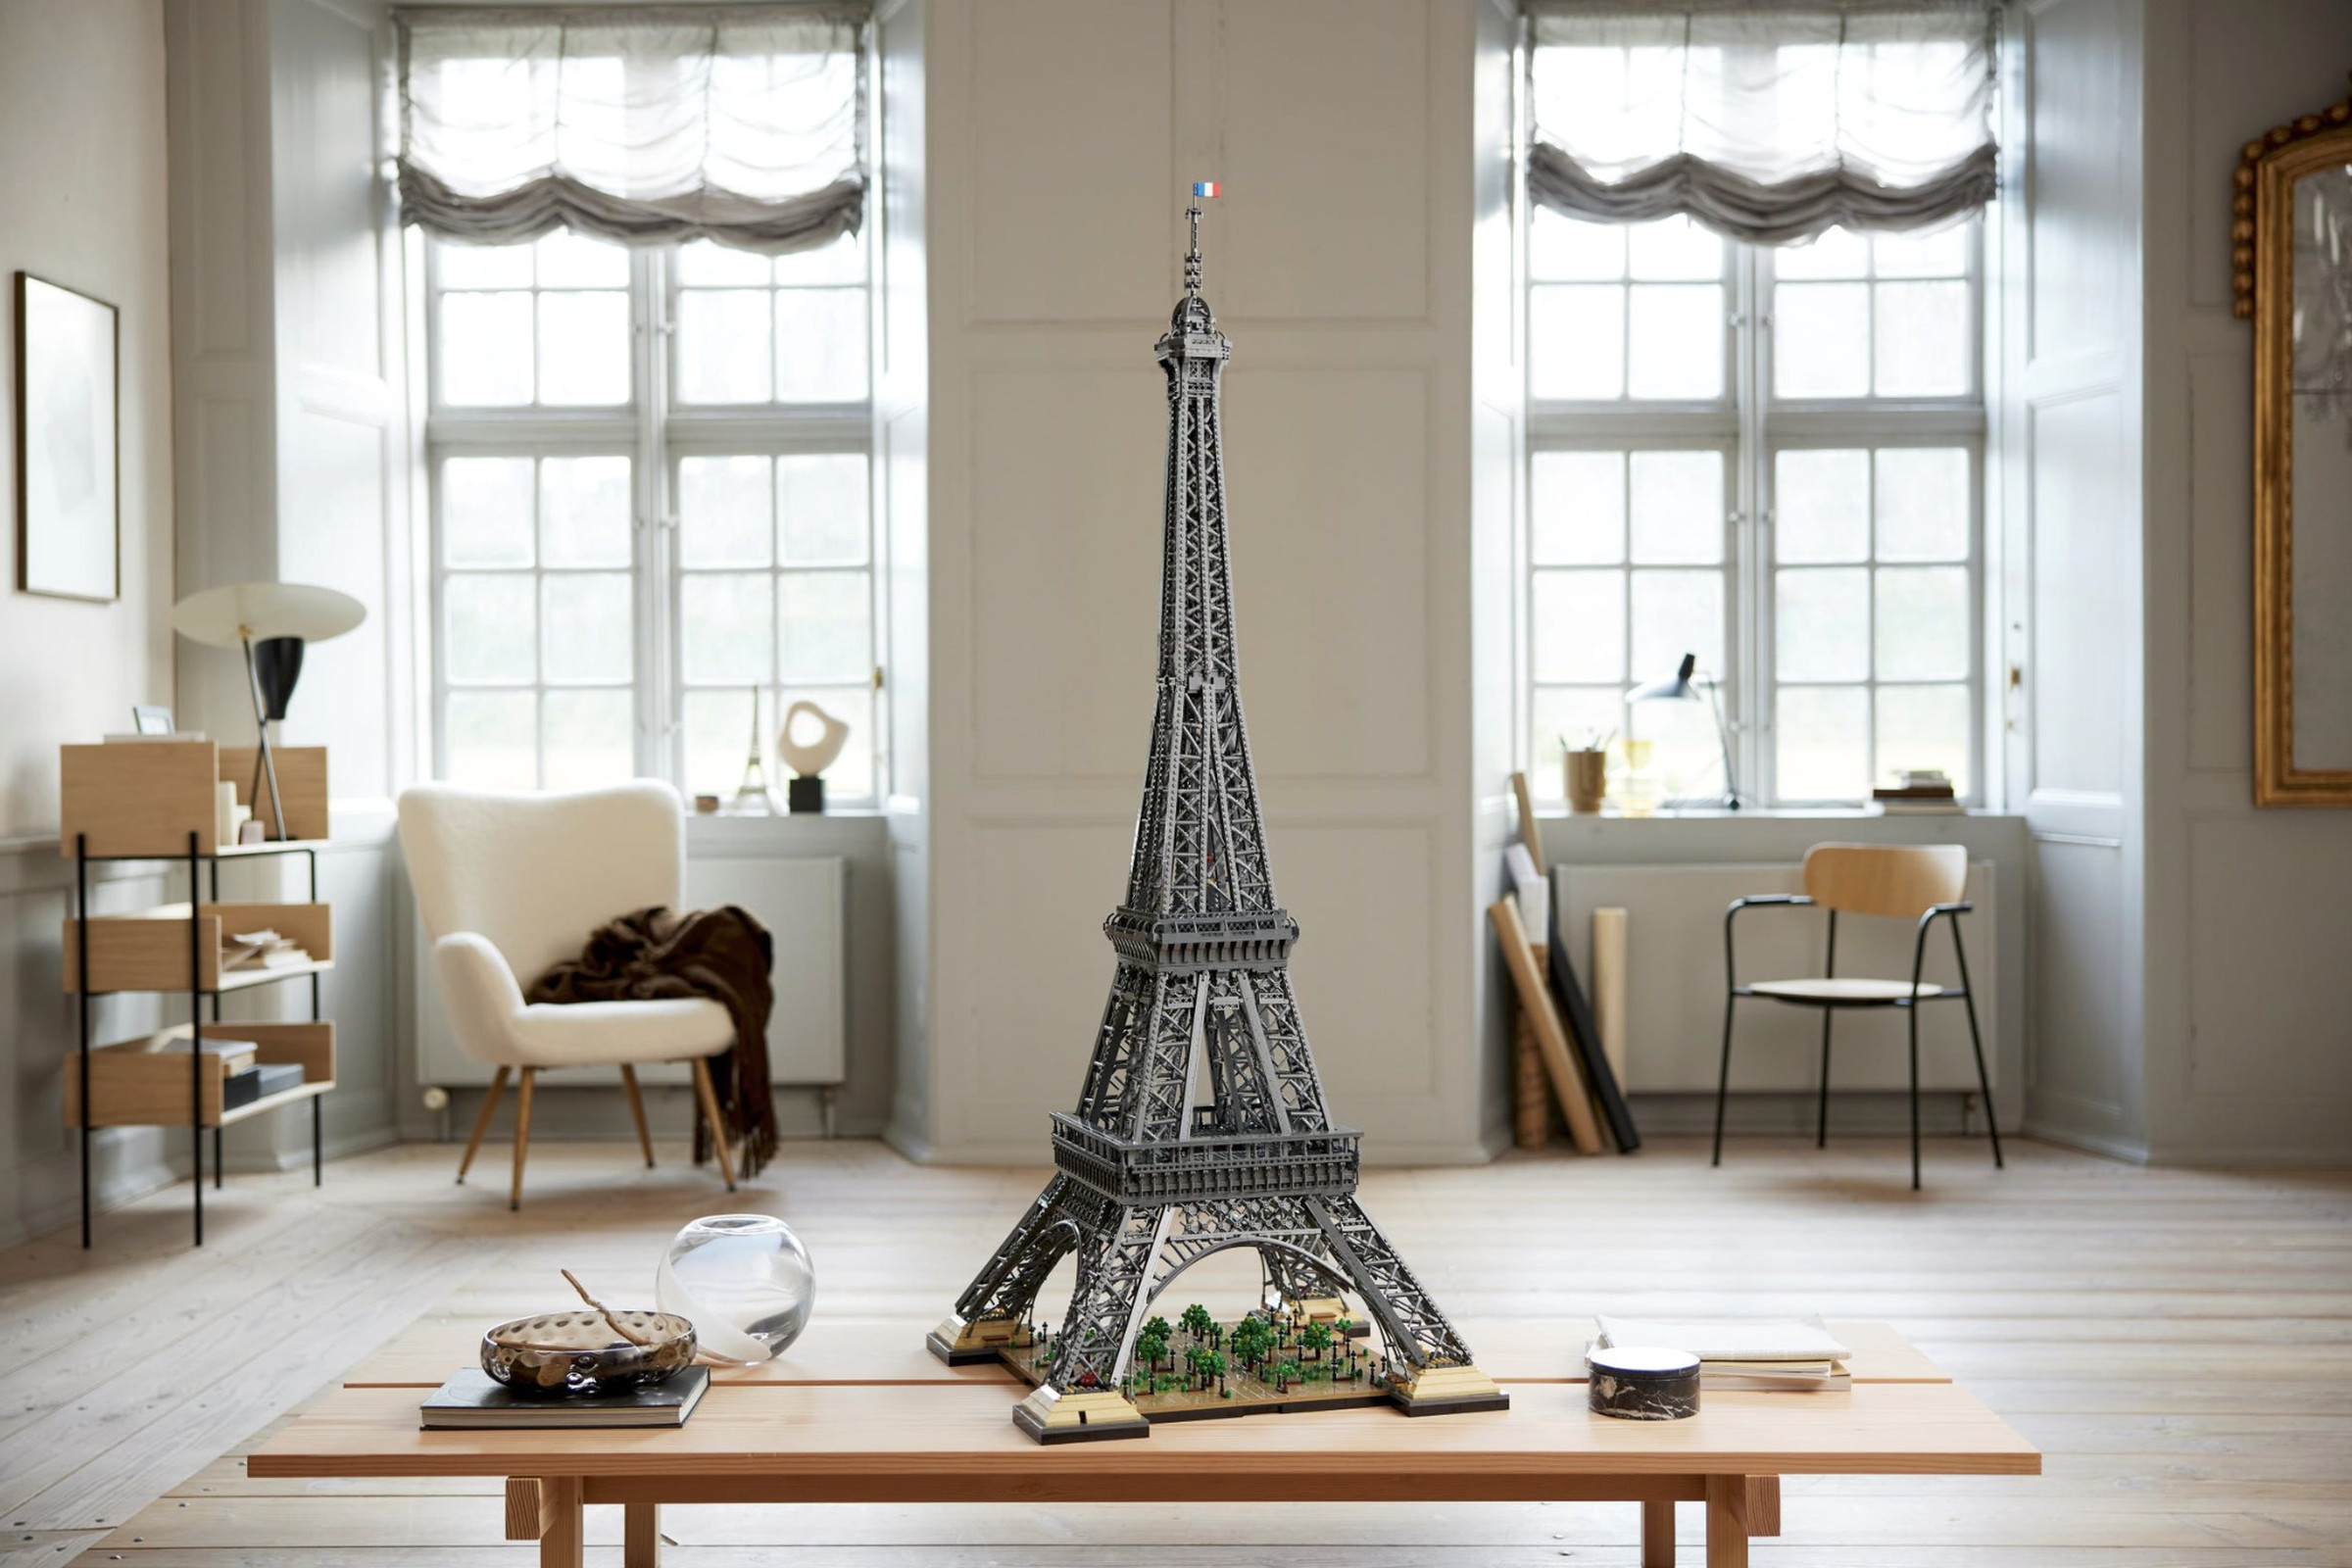 A five-foot tall Lego version of the Eiffel Tower, sitting on a table in a bright and airy living room.